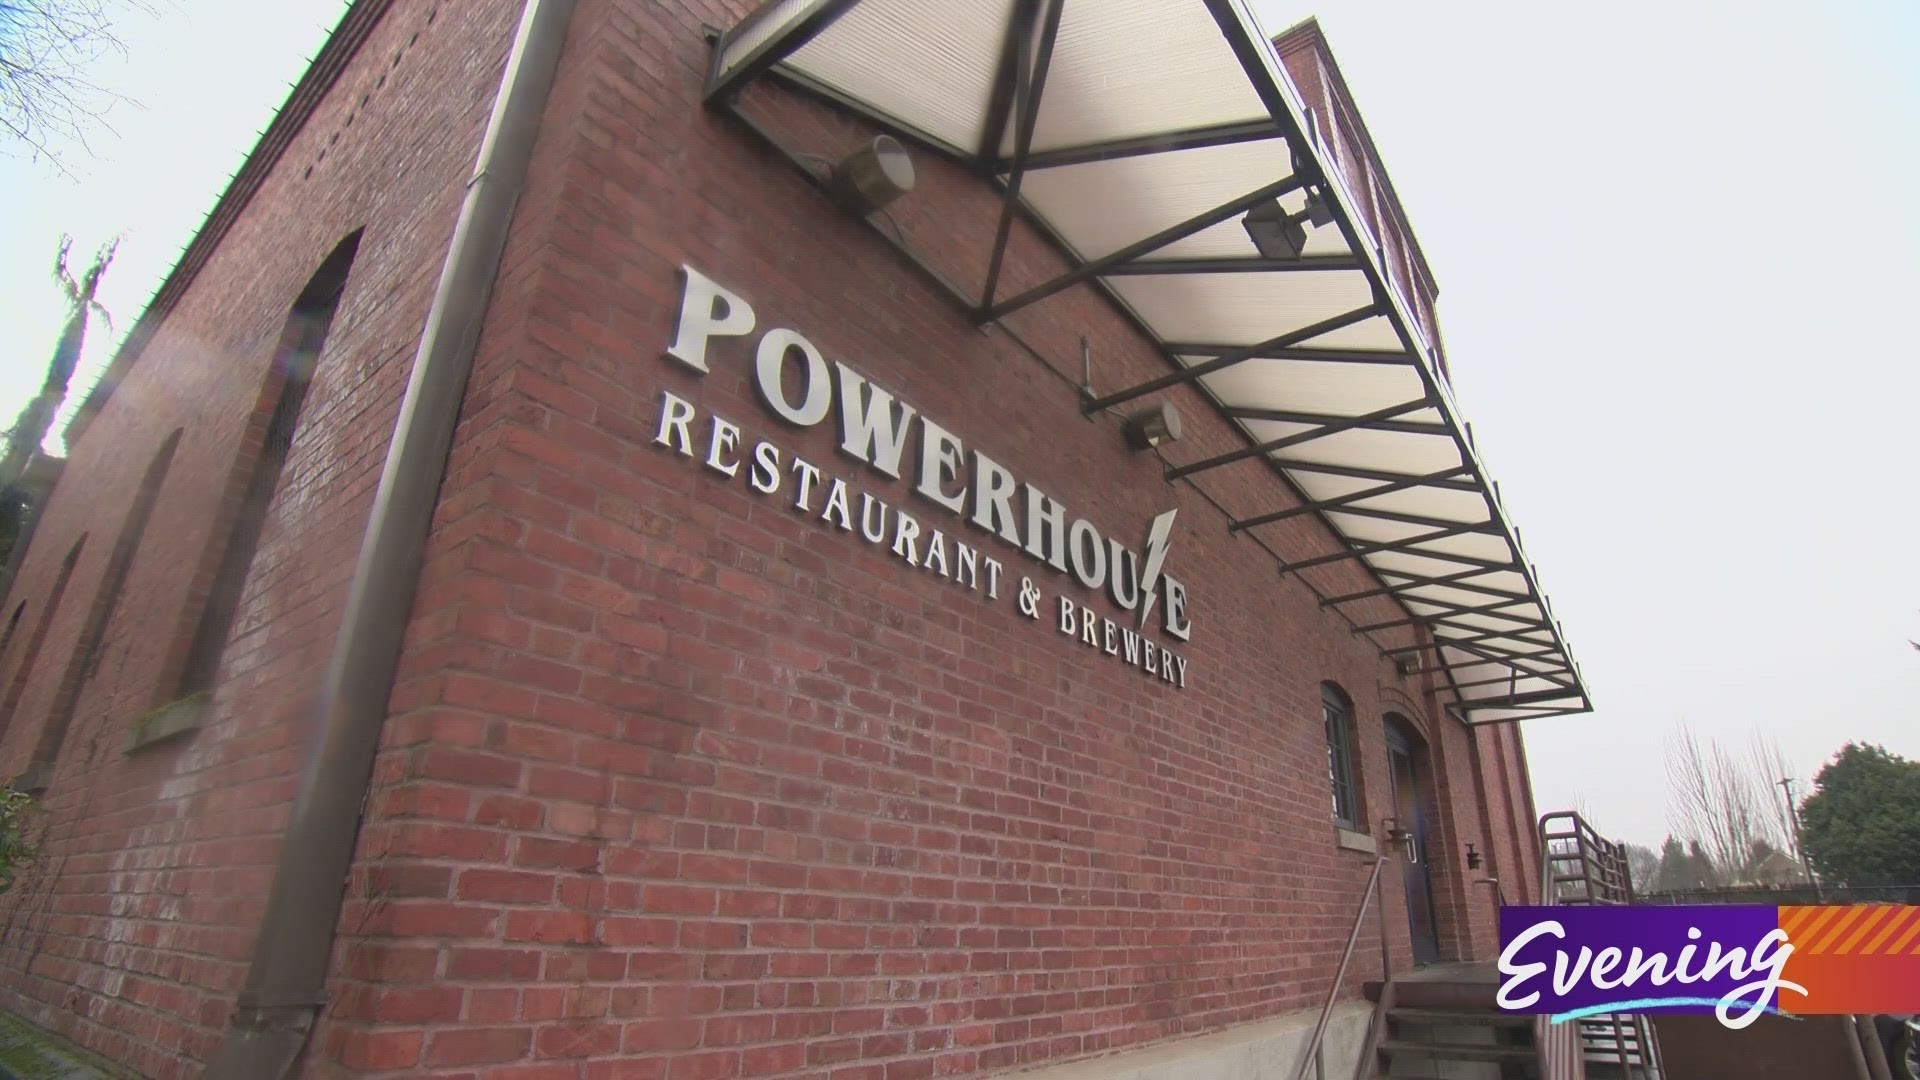 The building started as a substation in the early 1900s. #k5evening